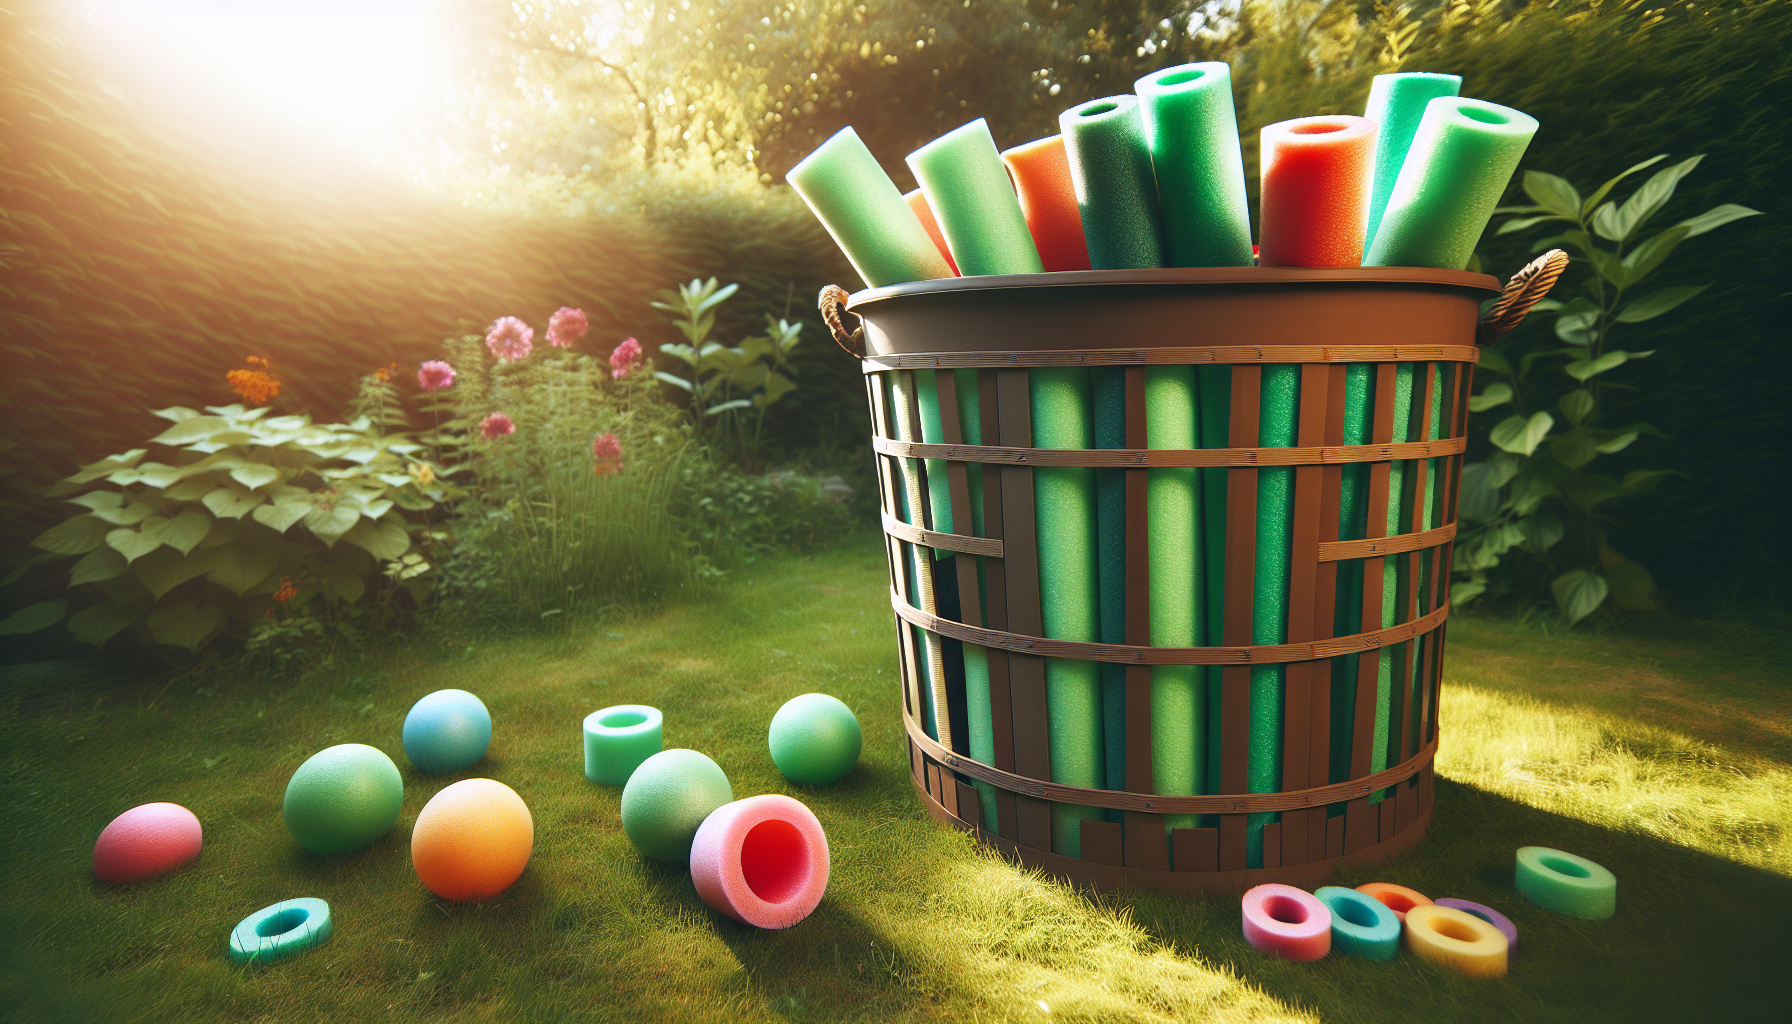 Make a green storage basket using pool noodles and a laundry basket